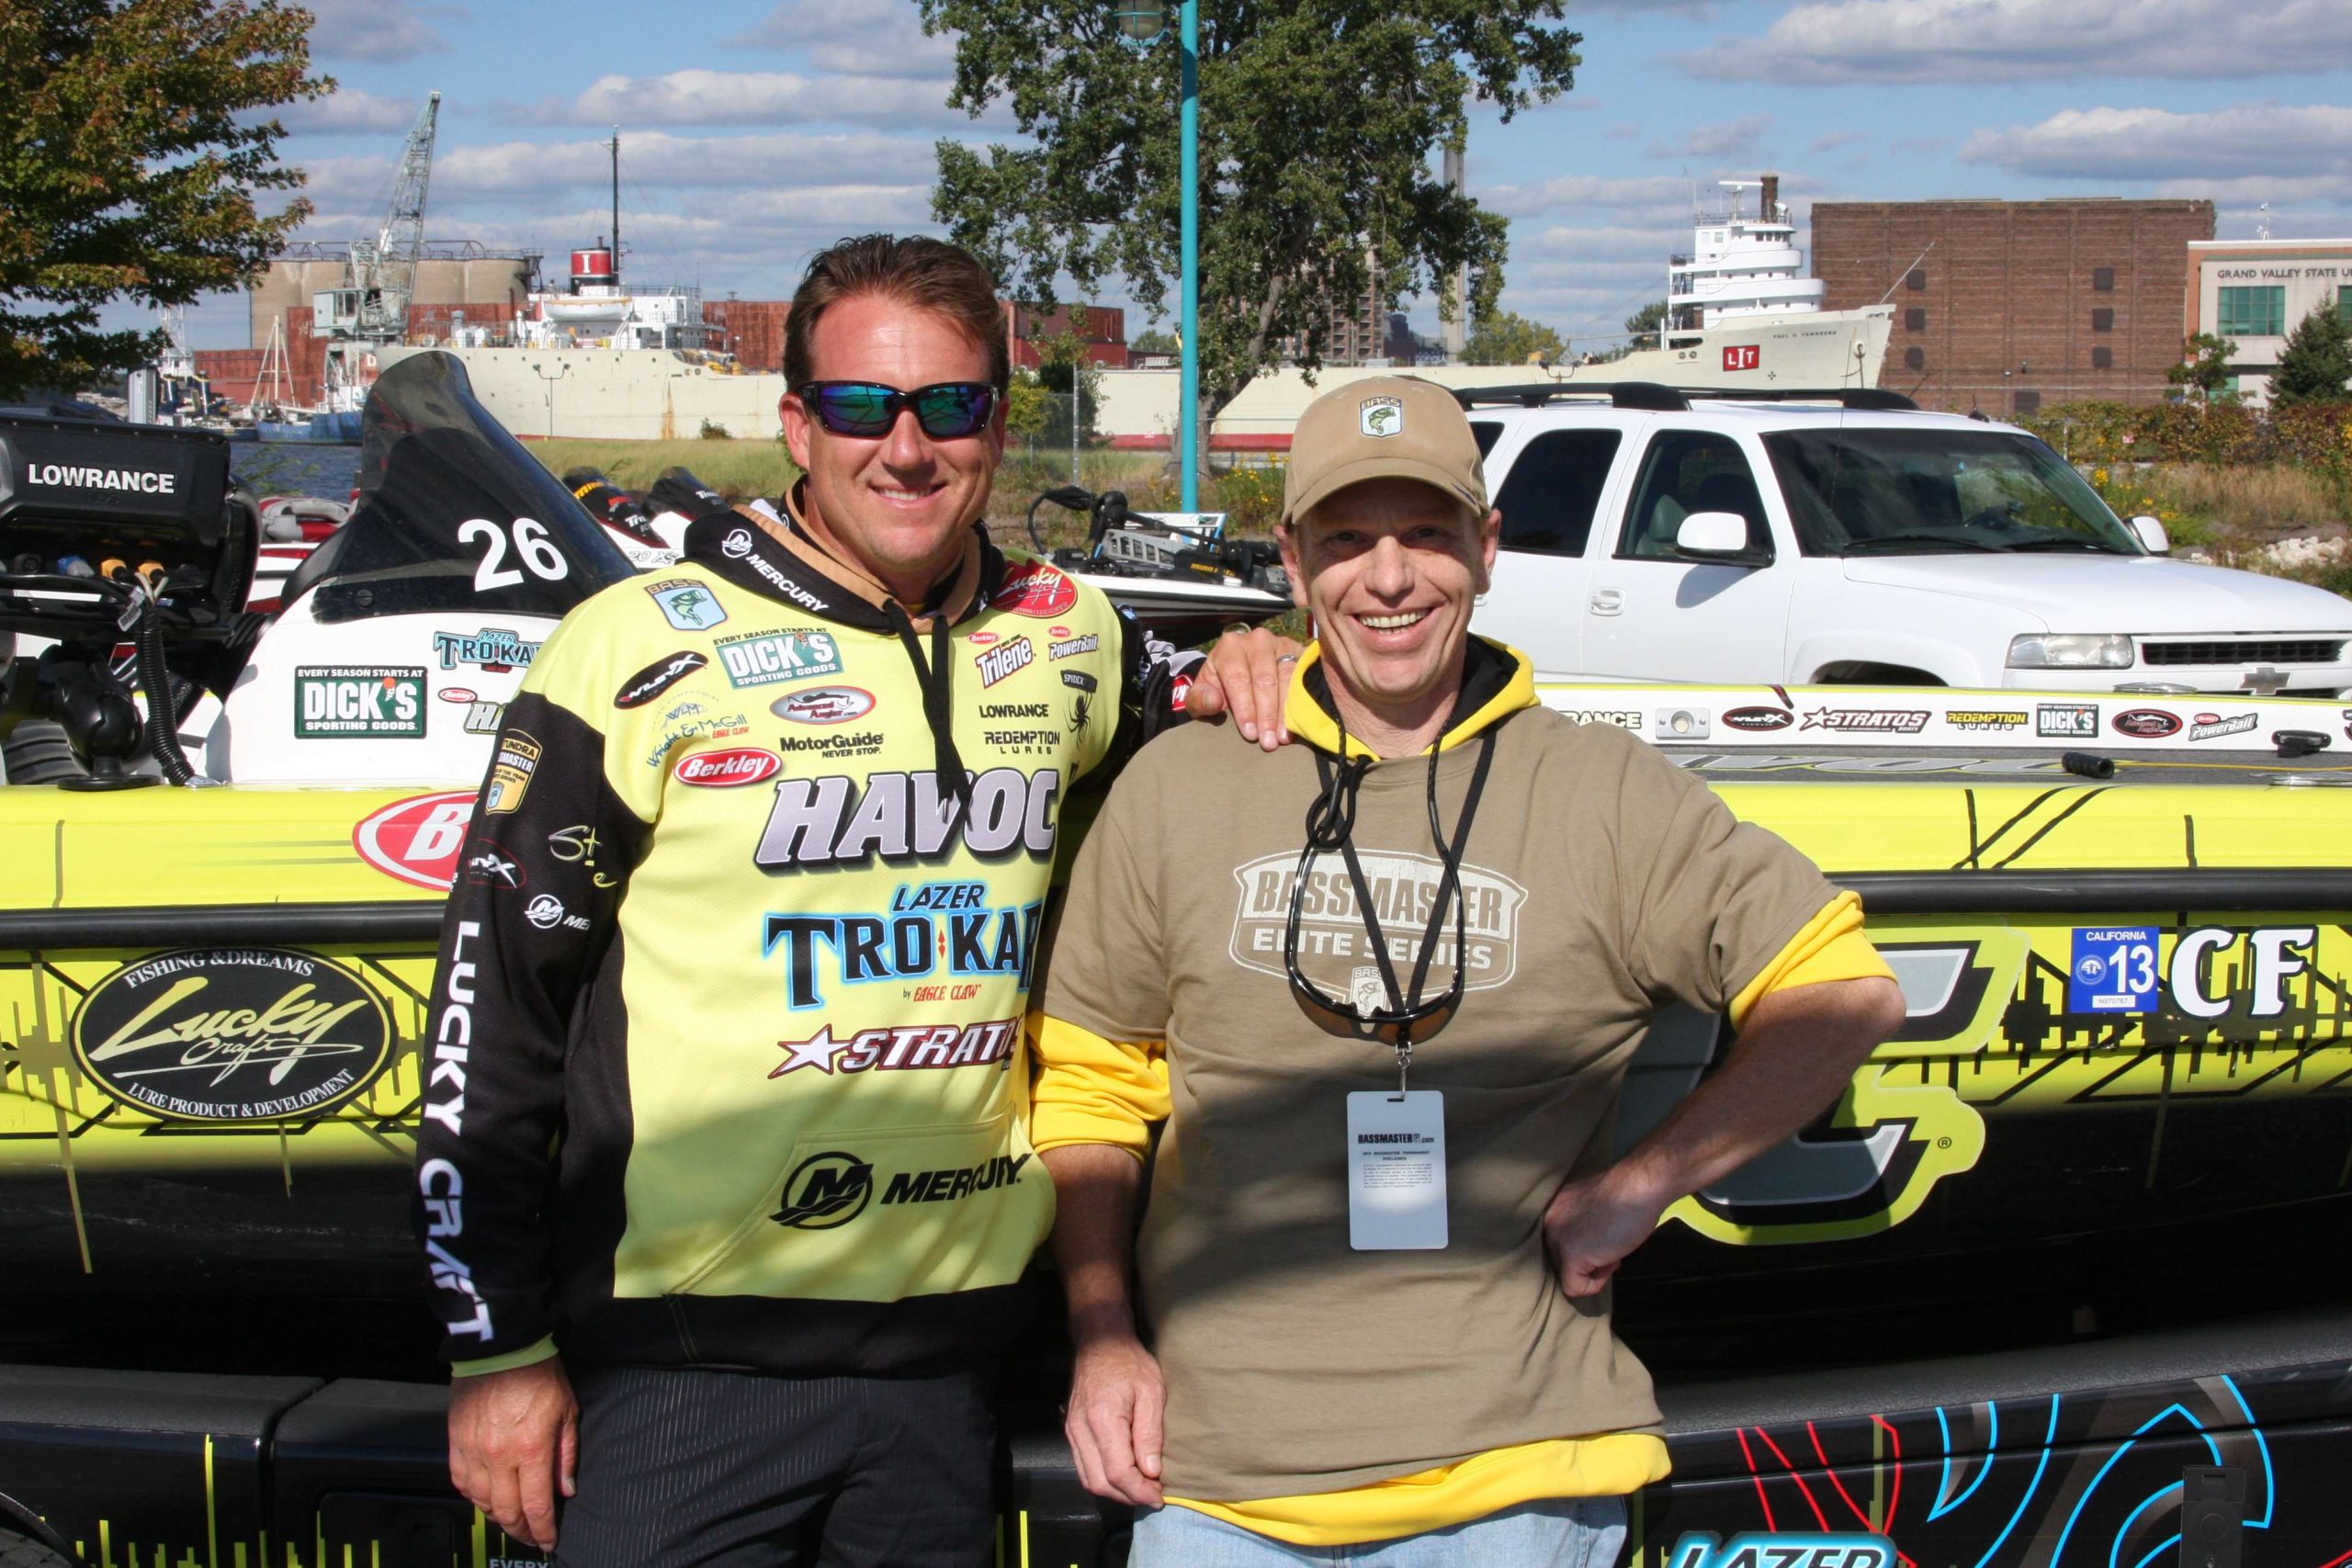 Oswald met with Skeet in Muskegon, Mich., following the Toyota All-Star event.